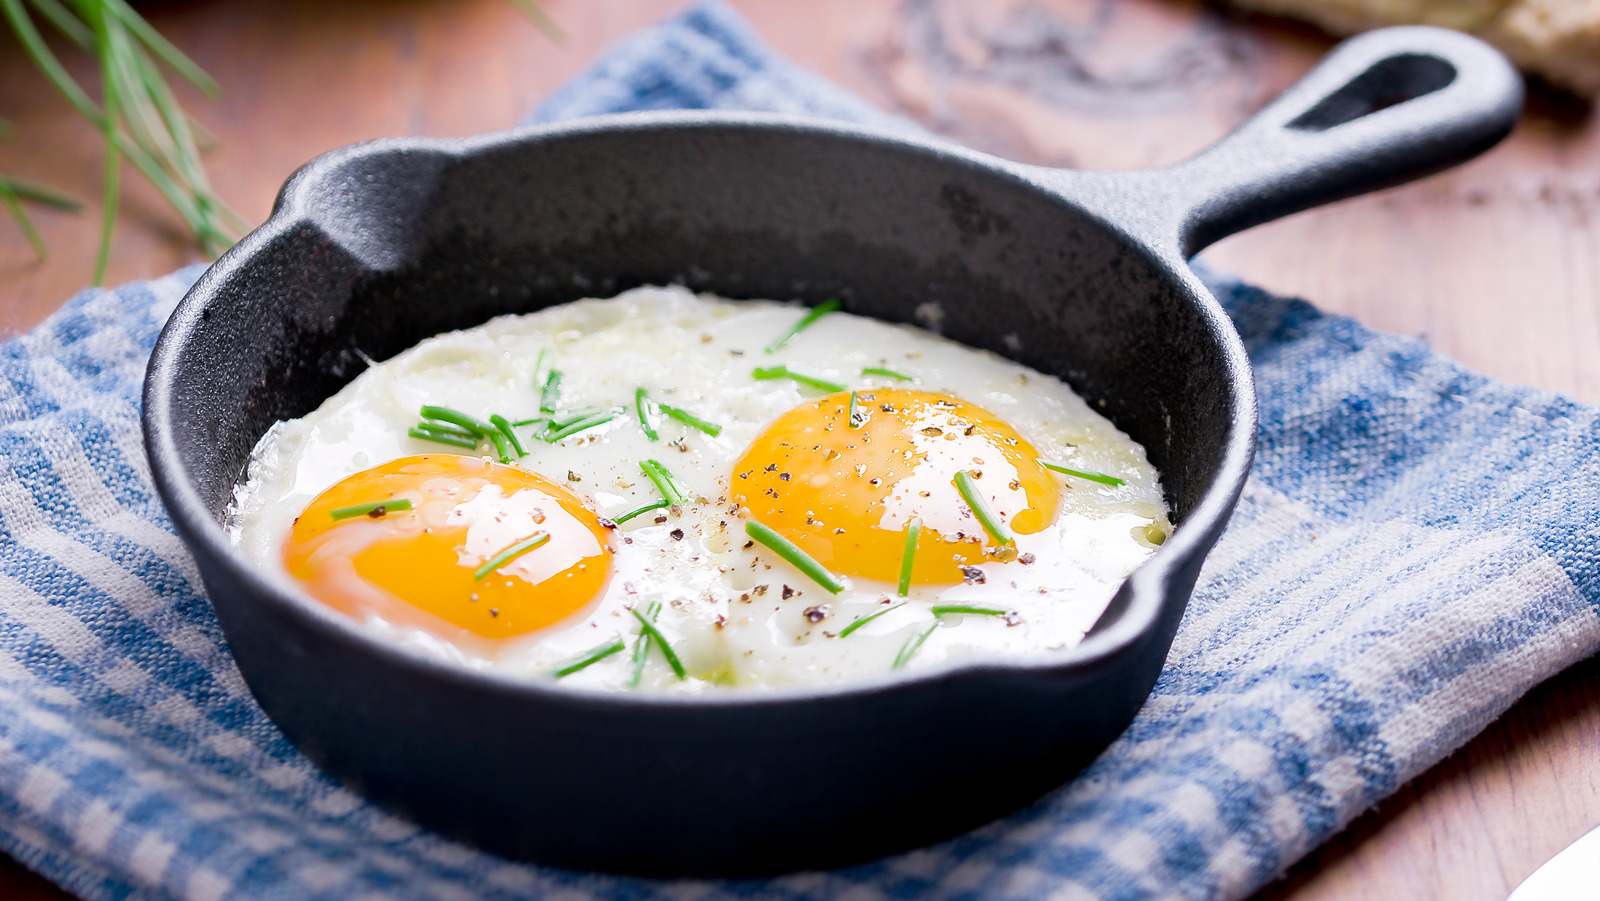 https://www.tastingtable.com/img/gallery/fry-eggs-in-this-unexpected-liquid-for-richer-mornings/l-intro-1662666706.jpg